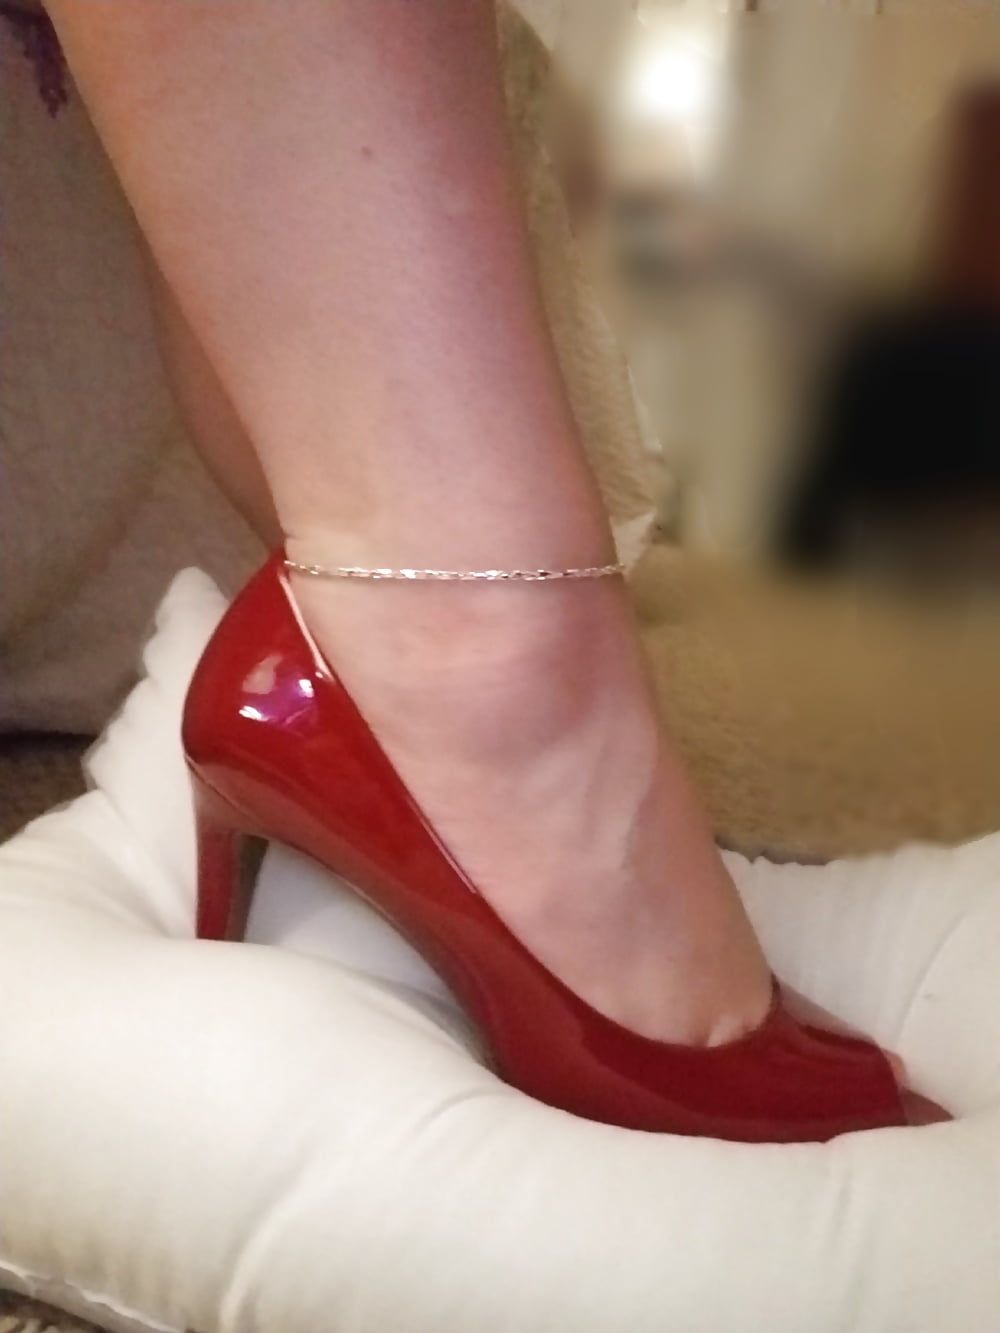 Feet, Legs, Heels & Boots of the Sweet Sexy Housewife  #19